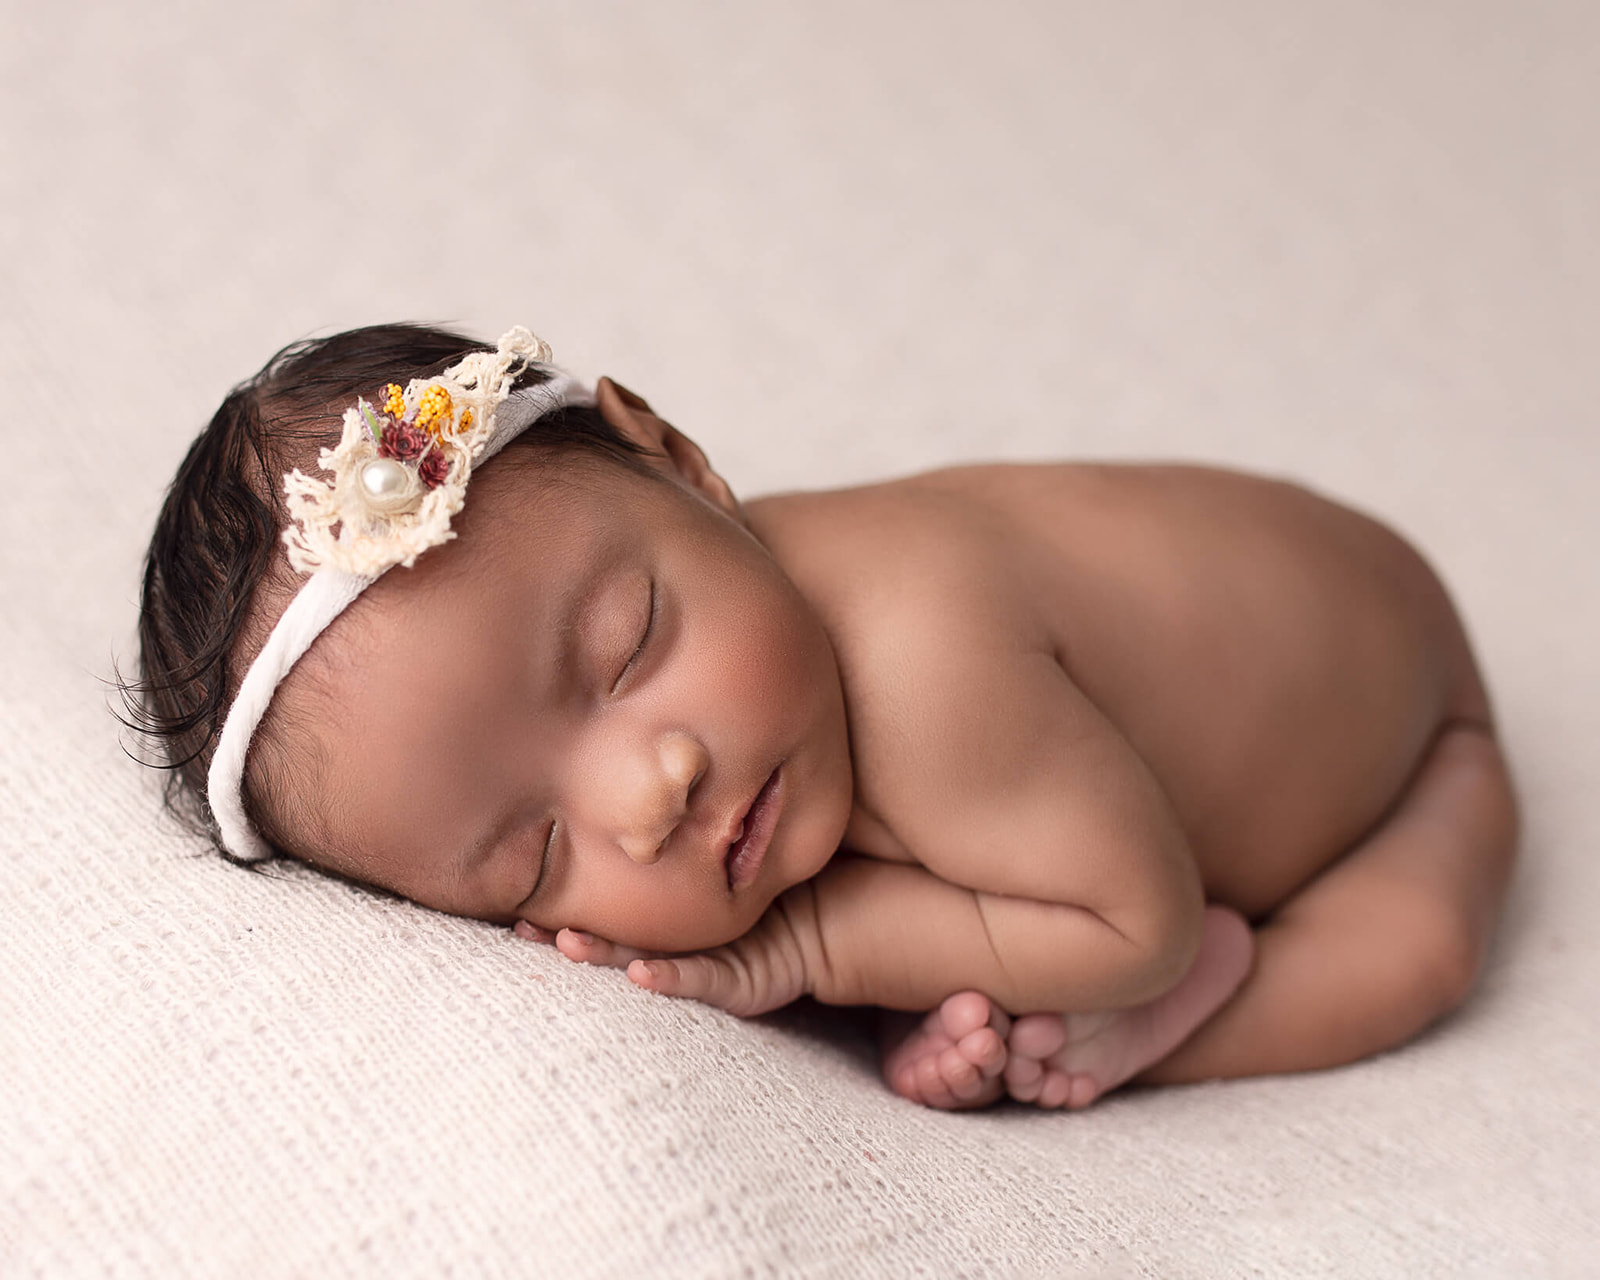 sleeping newborn in fetal position pose during newborn photography session